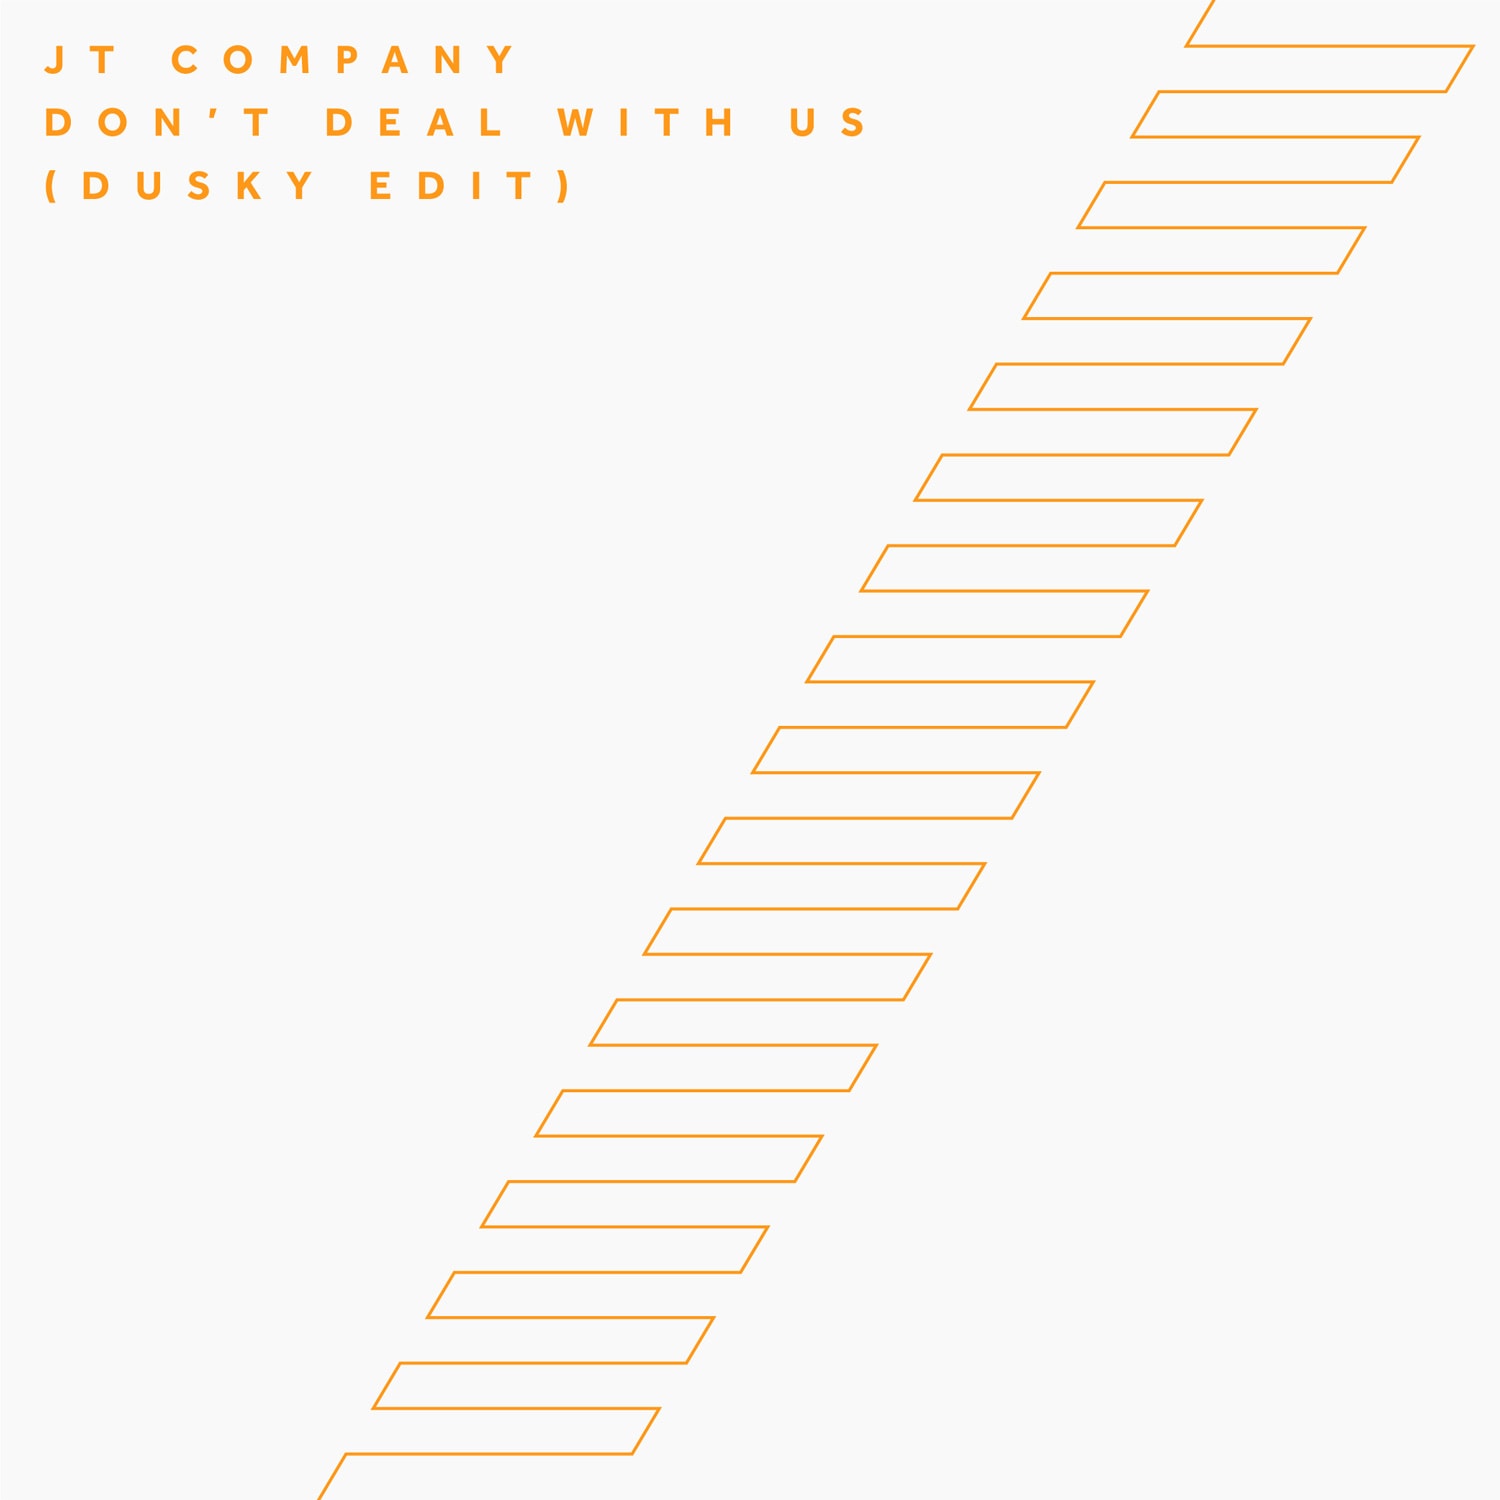 JT COMPANY – DON’T DEAL WITH US (DUSKY EDIT)